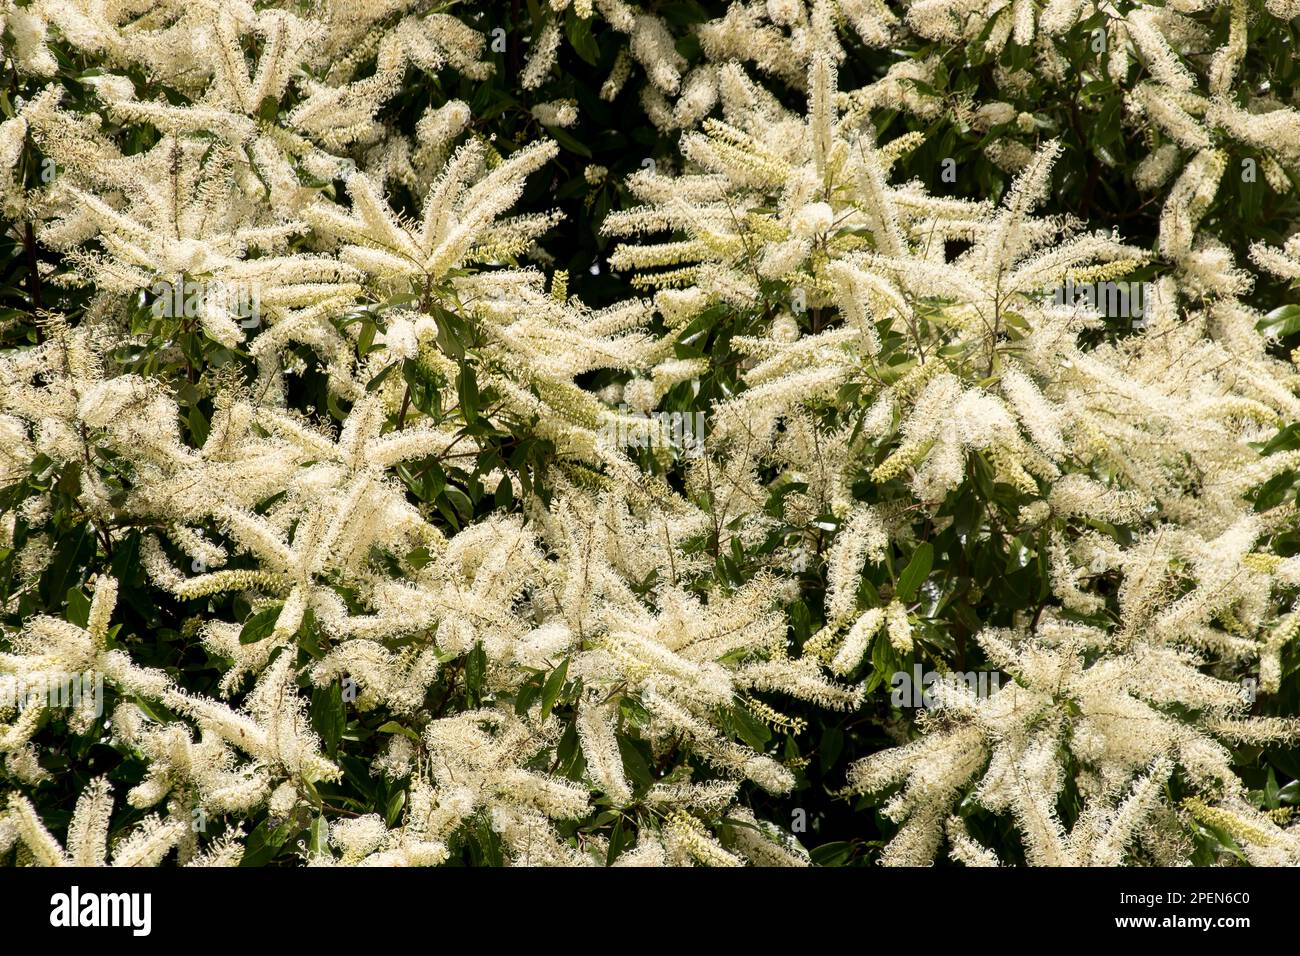 Huge mass of fragrant white blossom of Australian Ivory Curl tree, buckinghamia celsissima, in summer in Queensland garden. Background. Stock Photo